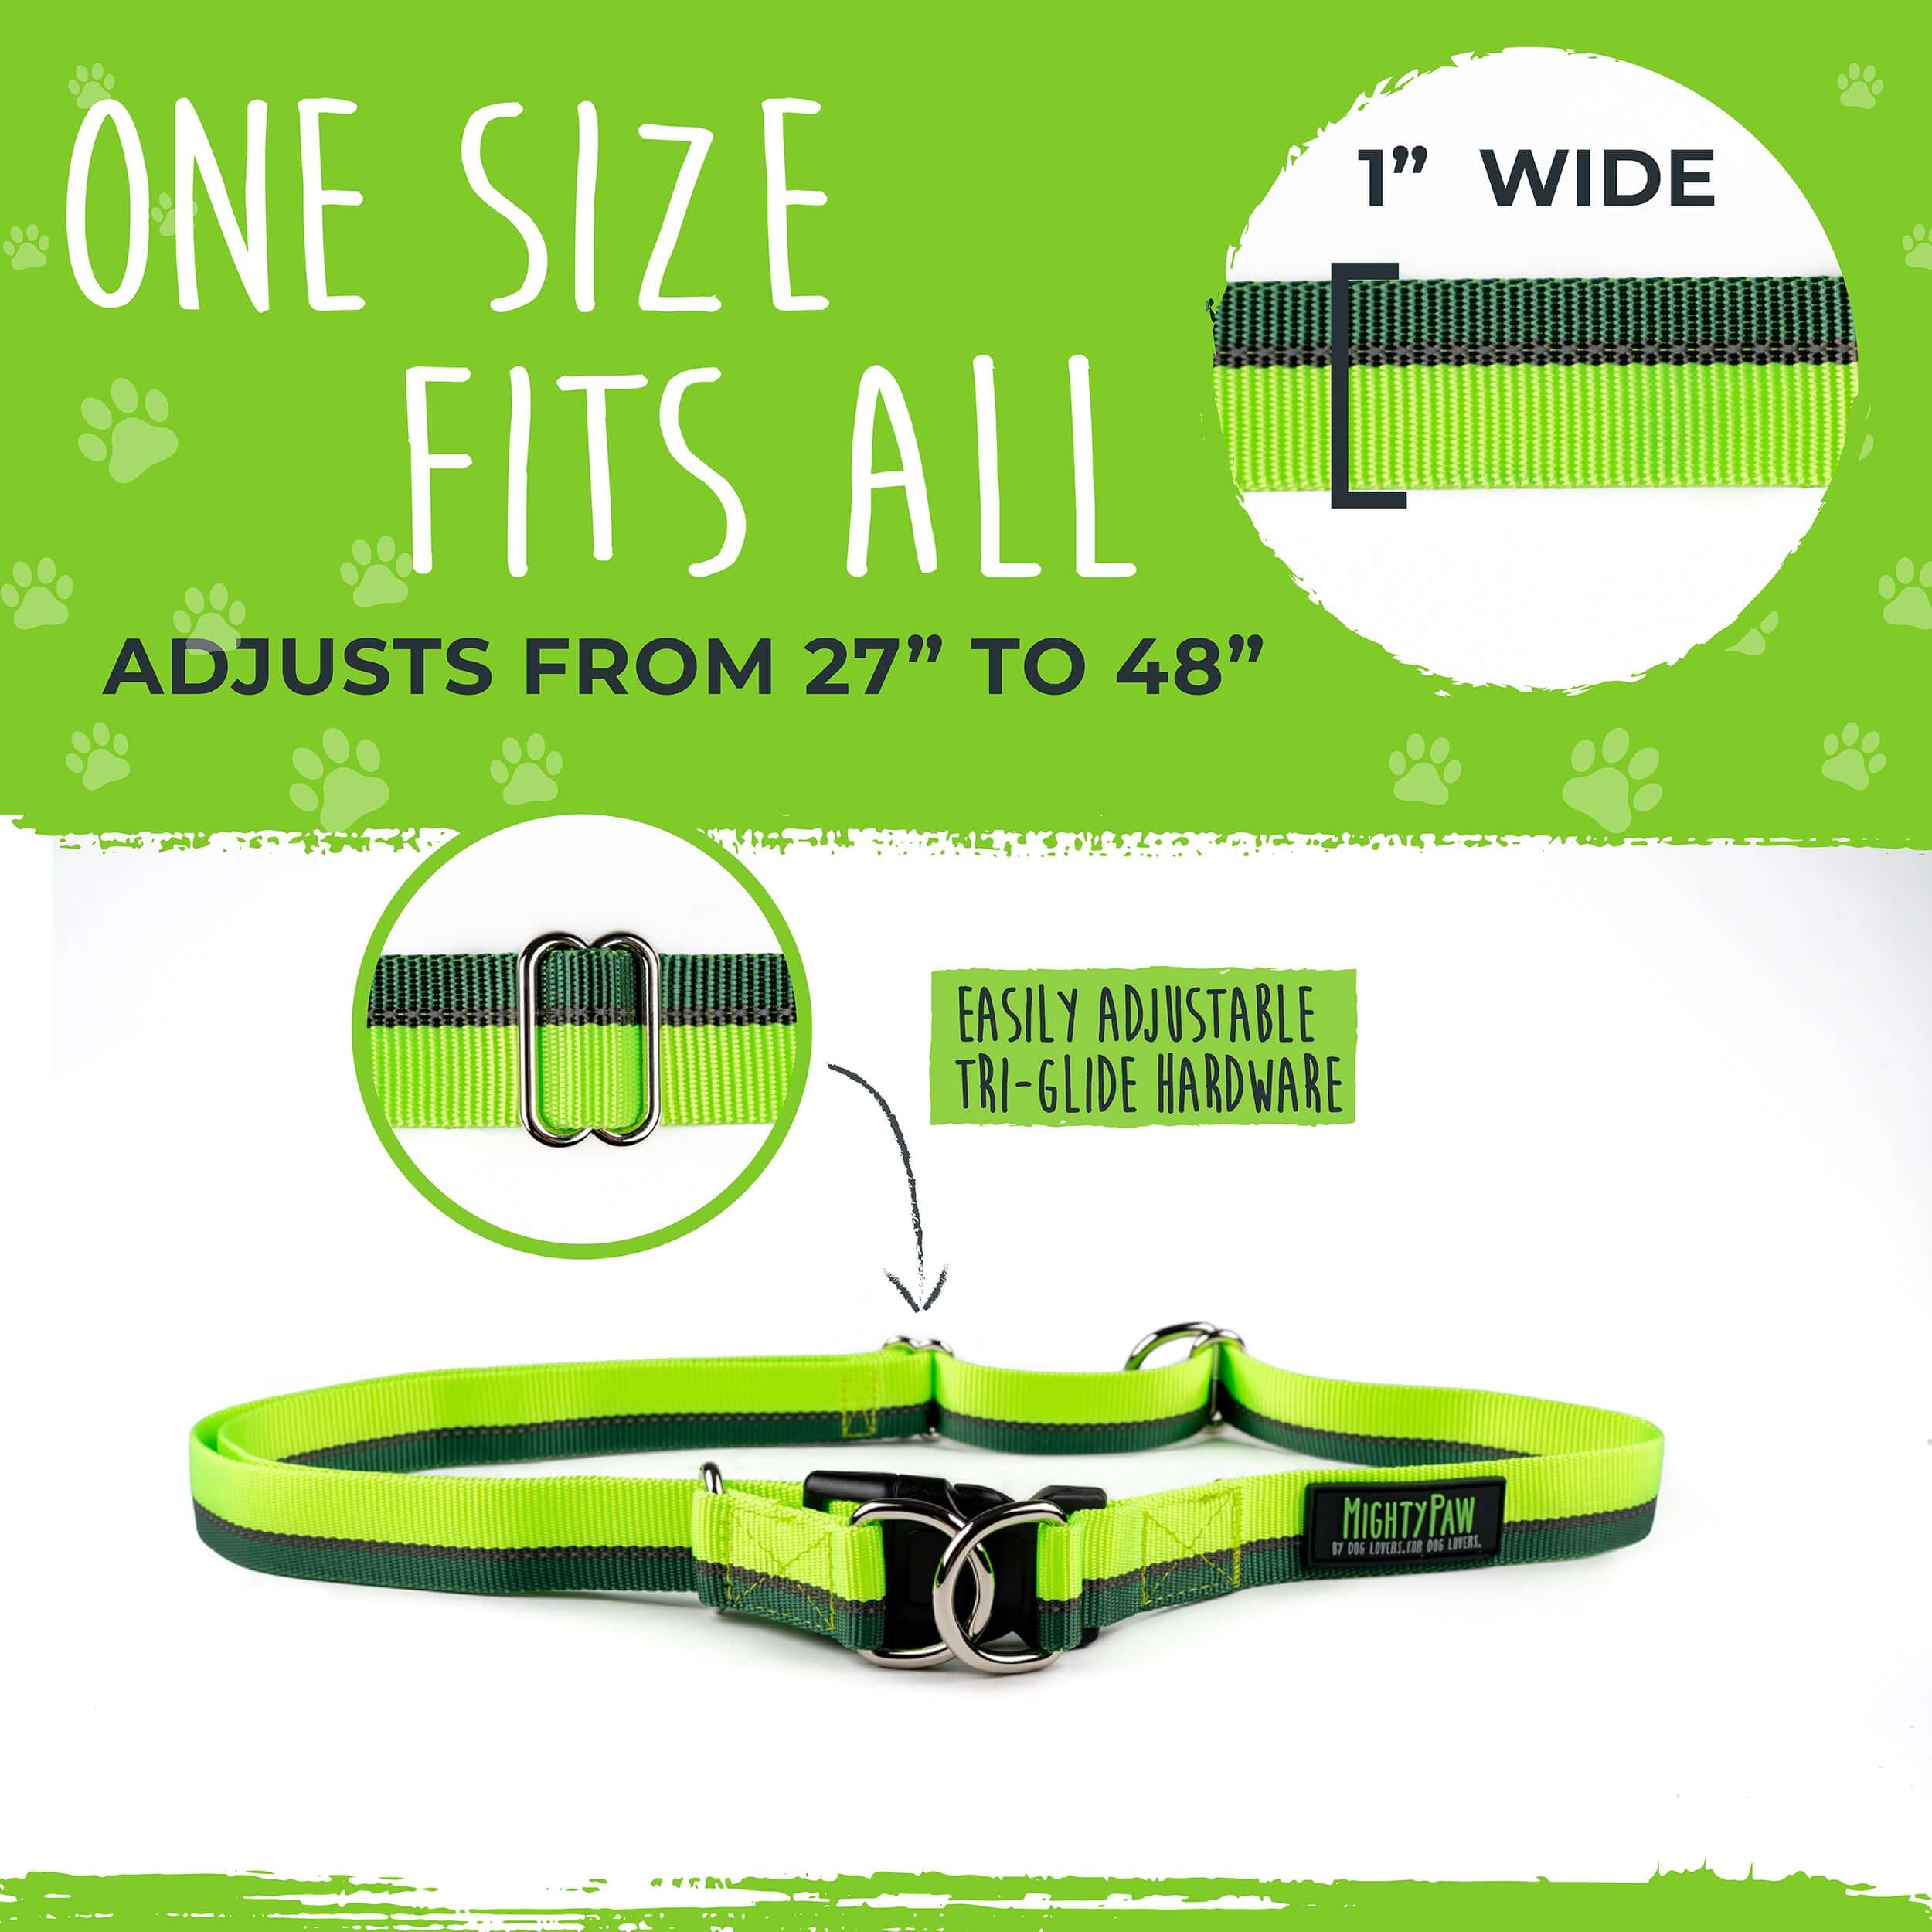 Mighty Paw Hands Free Bungee Leash 2.0